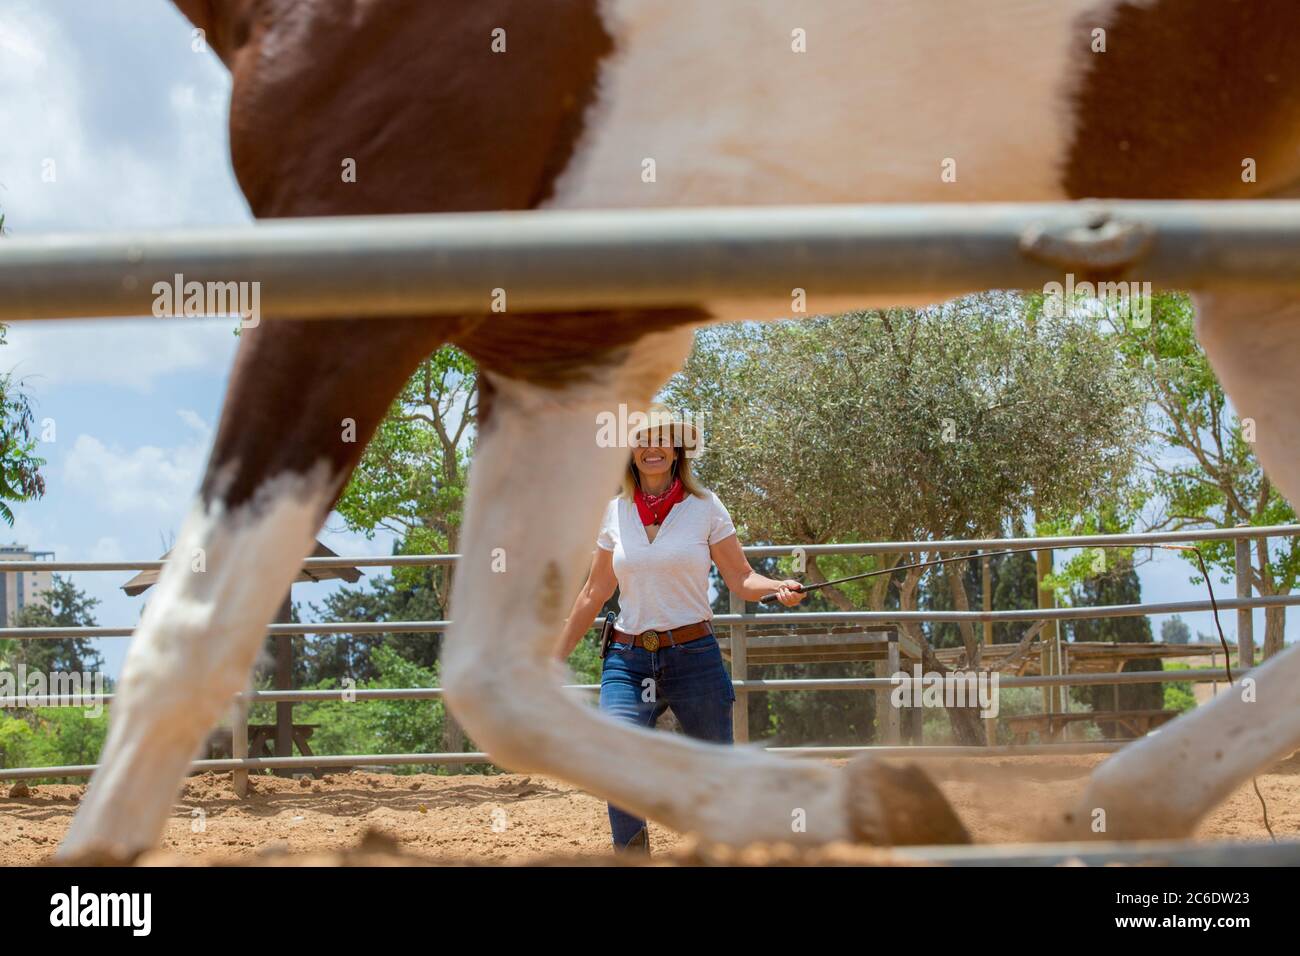 Female Horse breeder is caring for a brown and white (Pinto) horse. Photographed in Haniel [a moshav in central Israel. Located in the Sharon, Israel Stock Photo